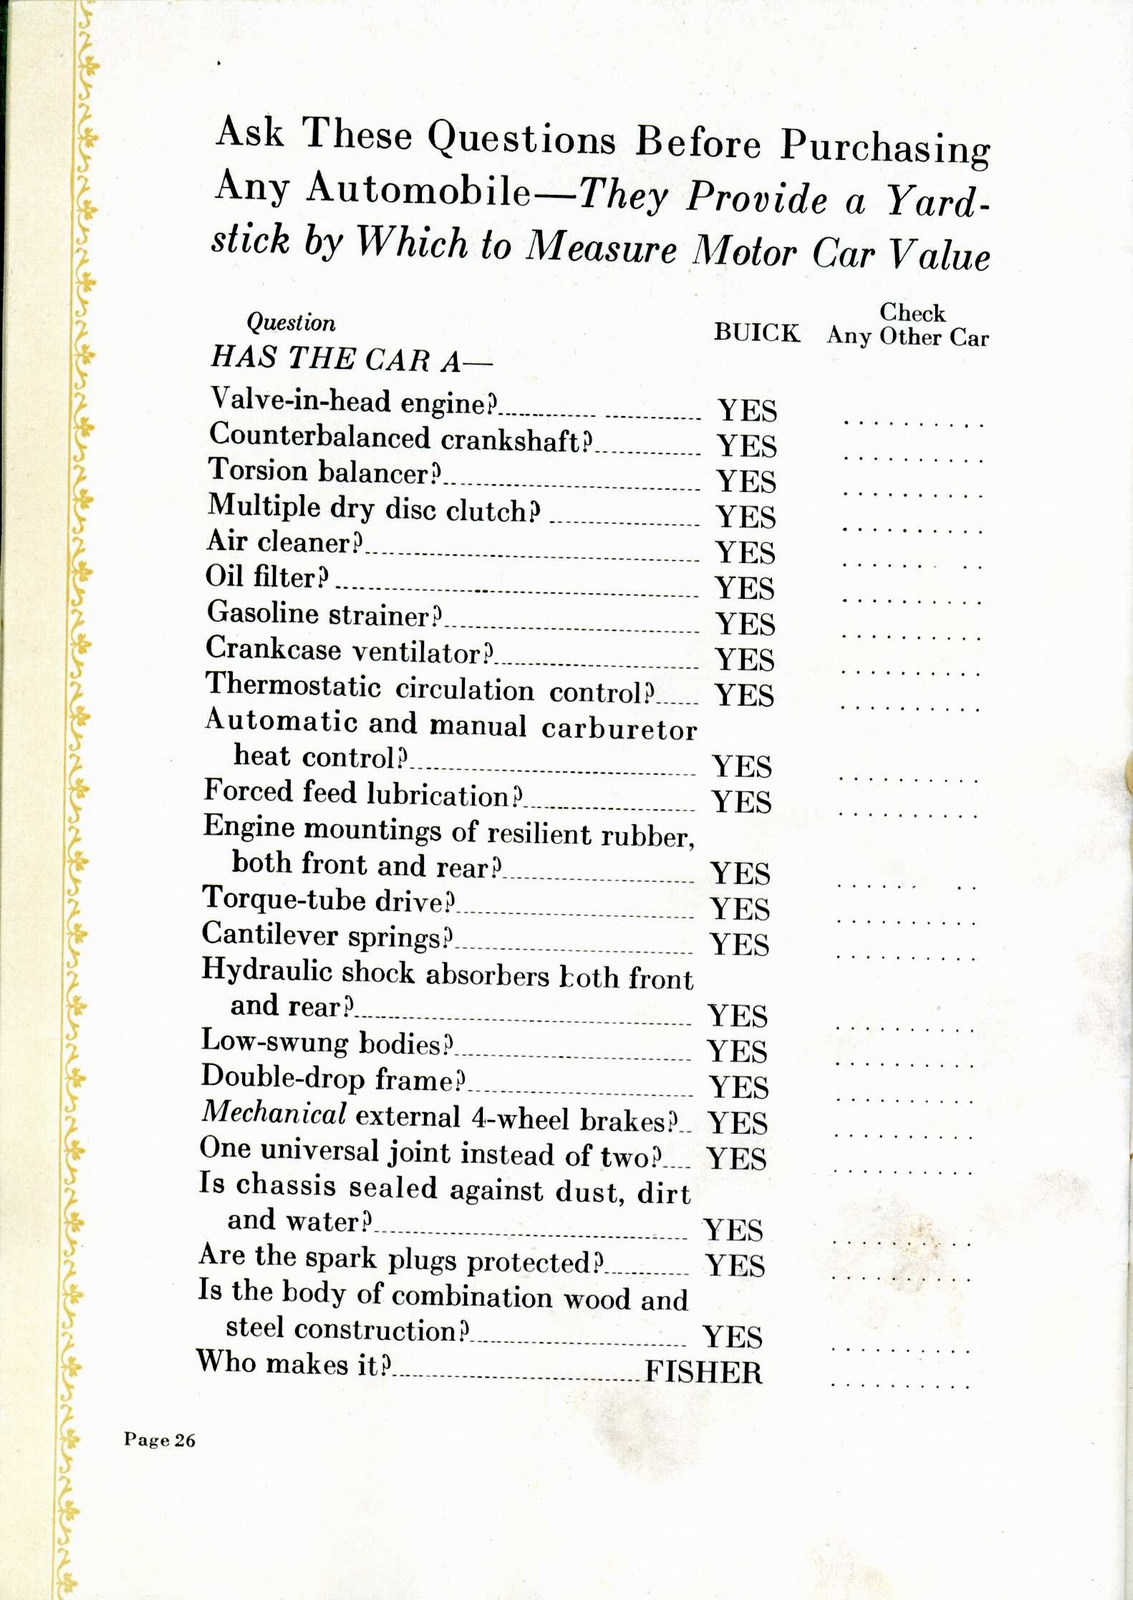 n_1928 Buick-How to Choose a Motor Car Wisely-26.jpg